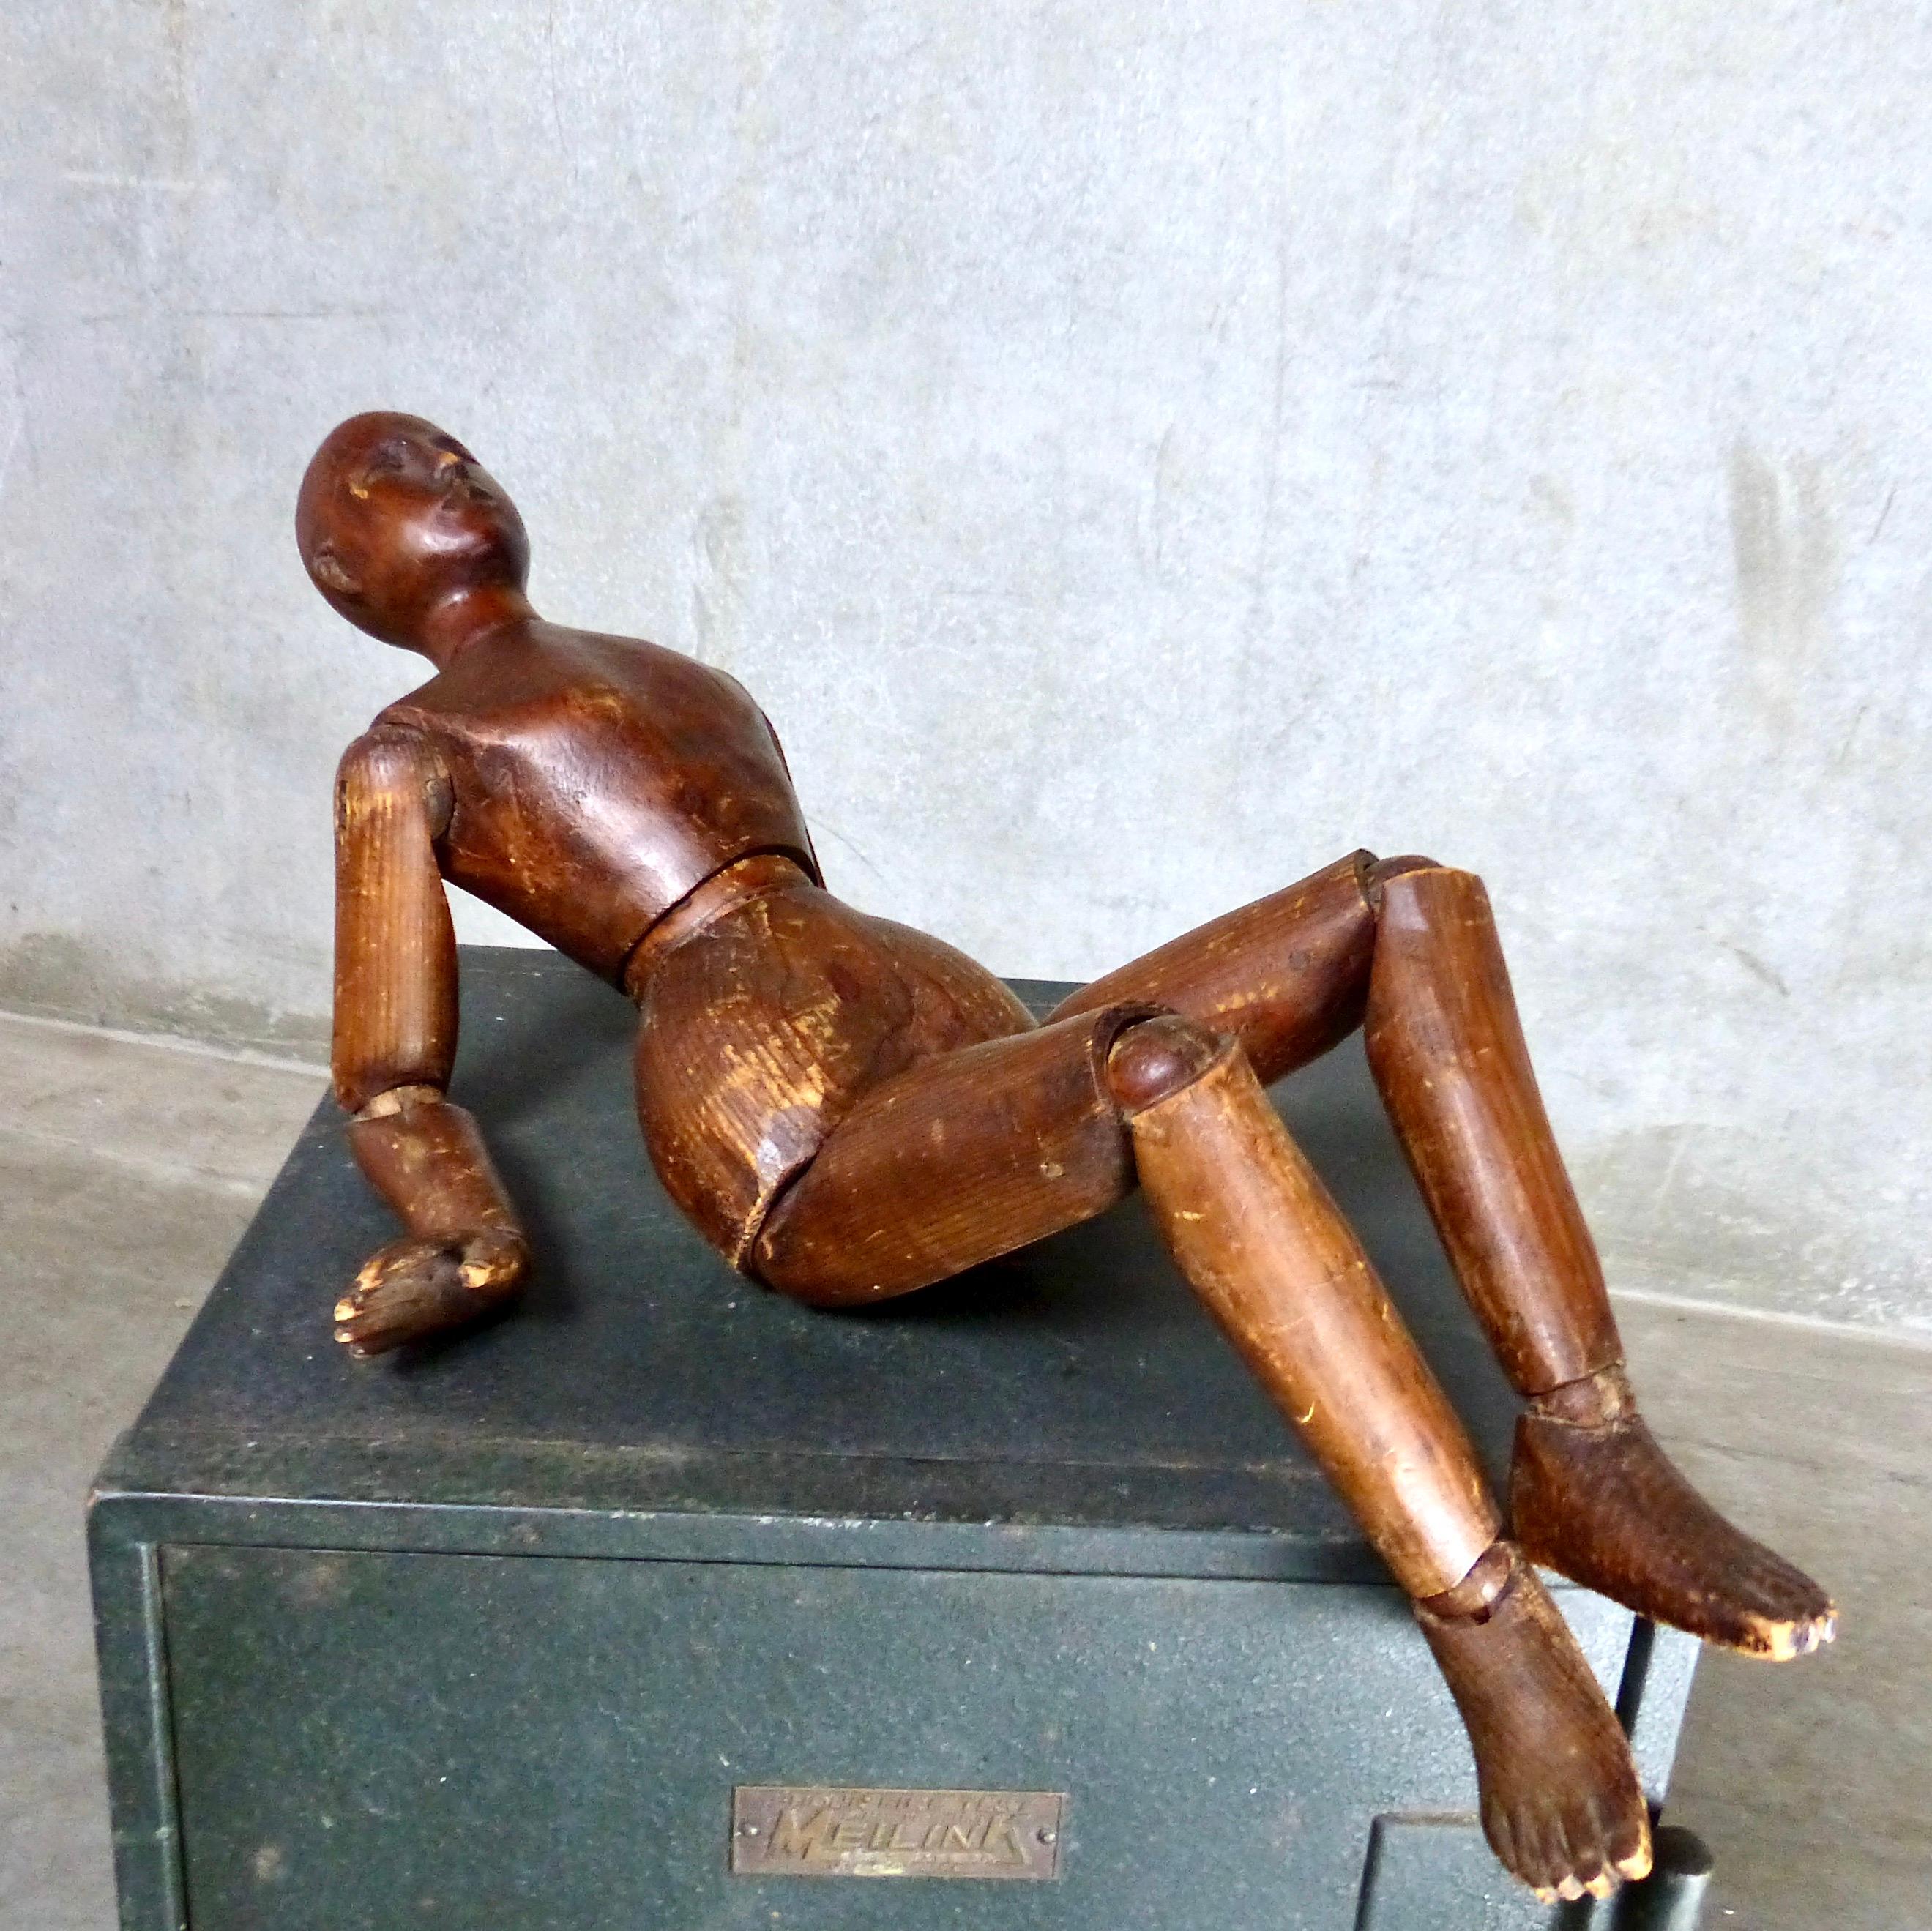 Carved French Wooden Articulating Artist’s Model, circa 1900